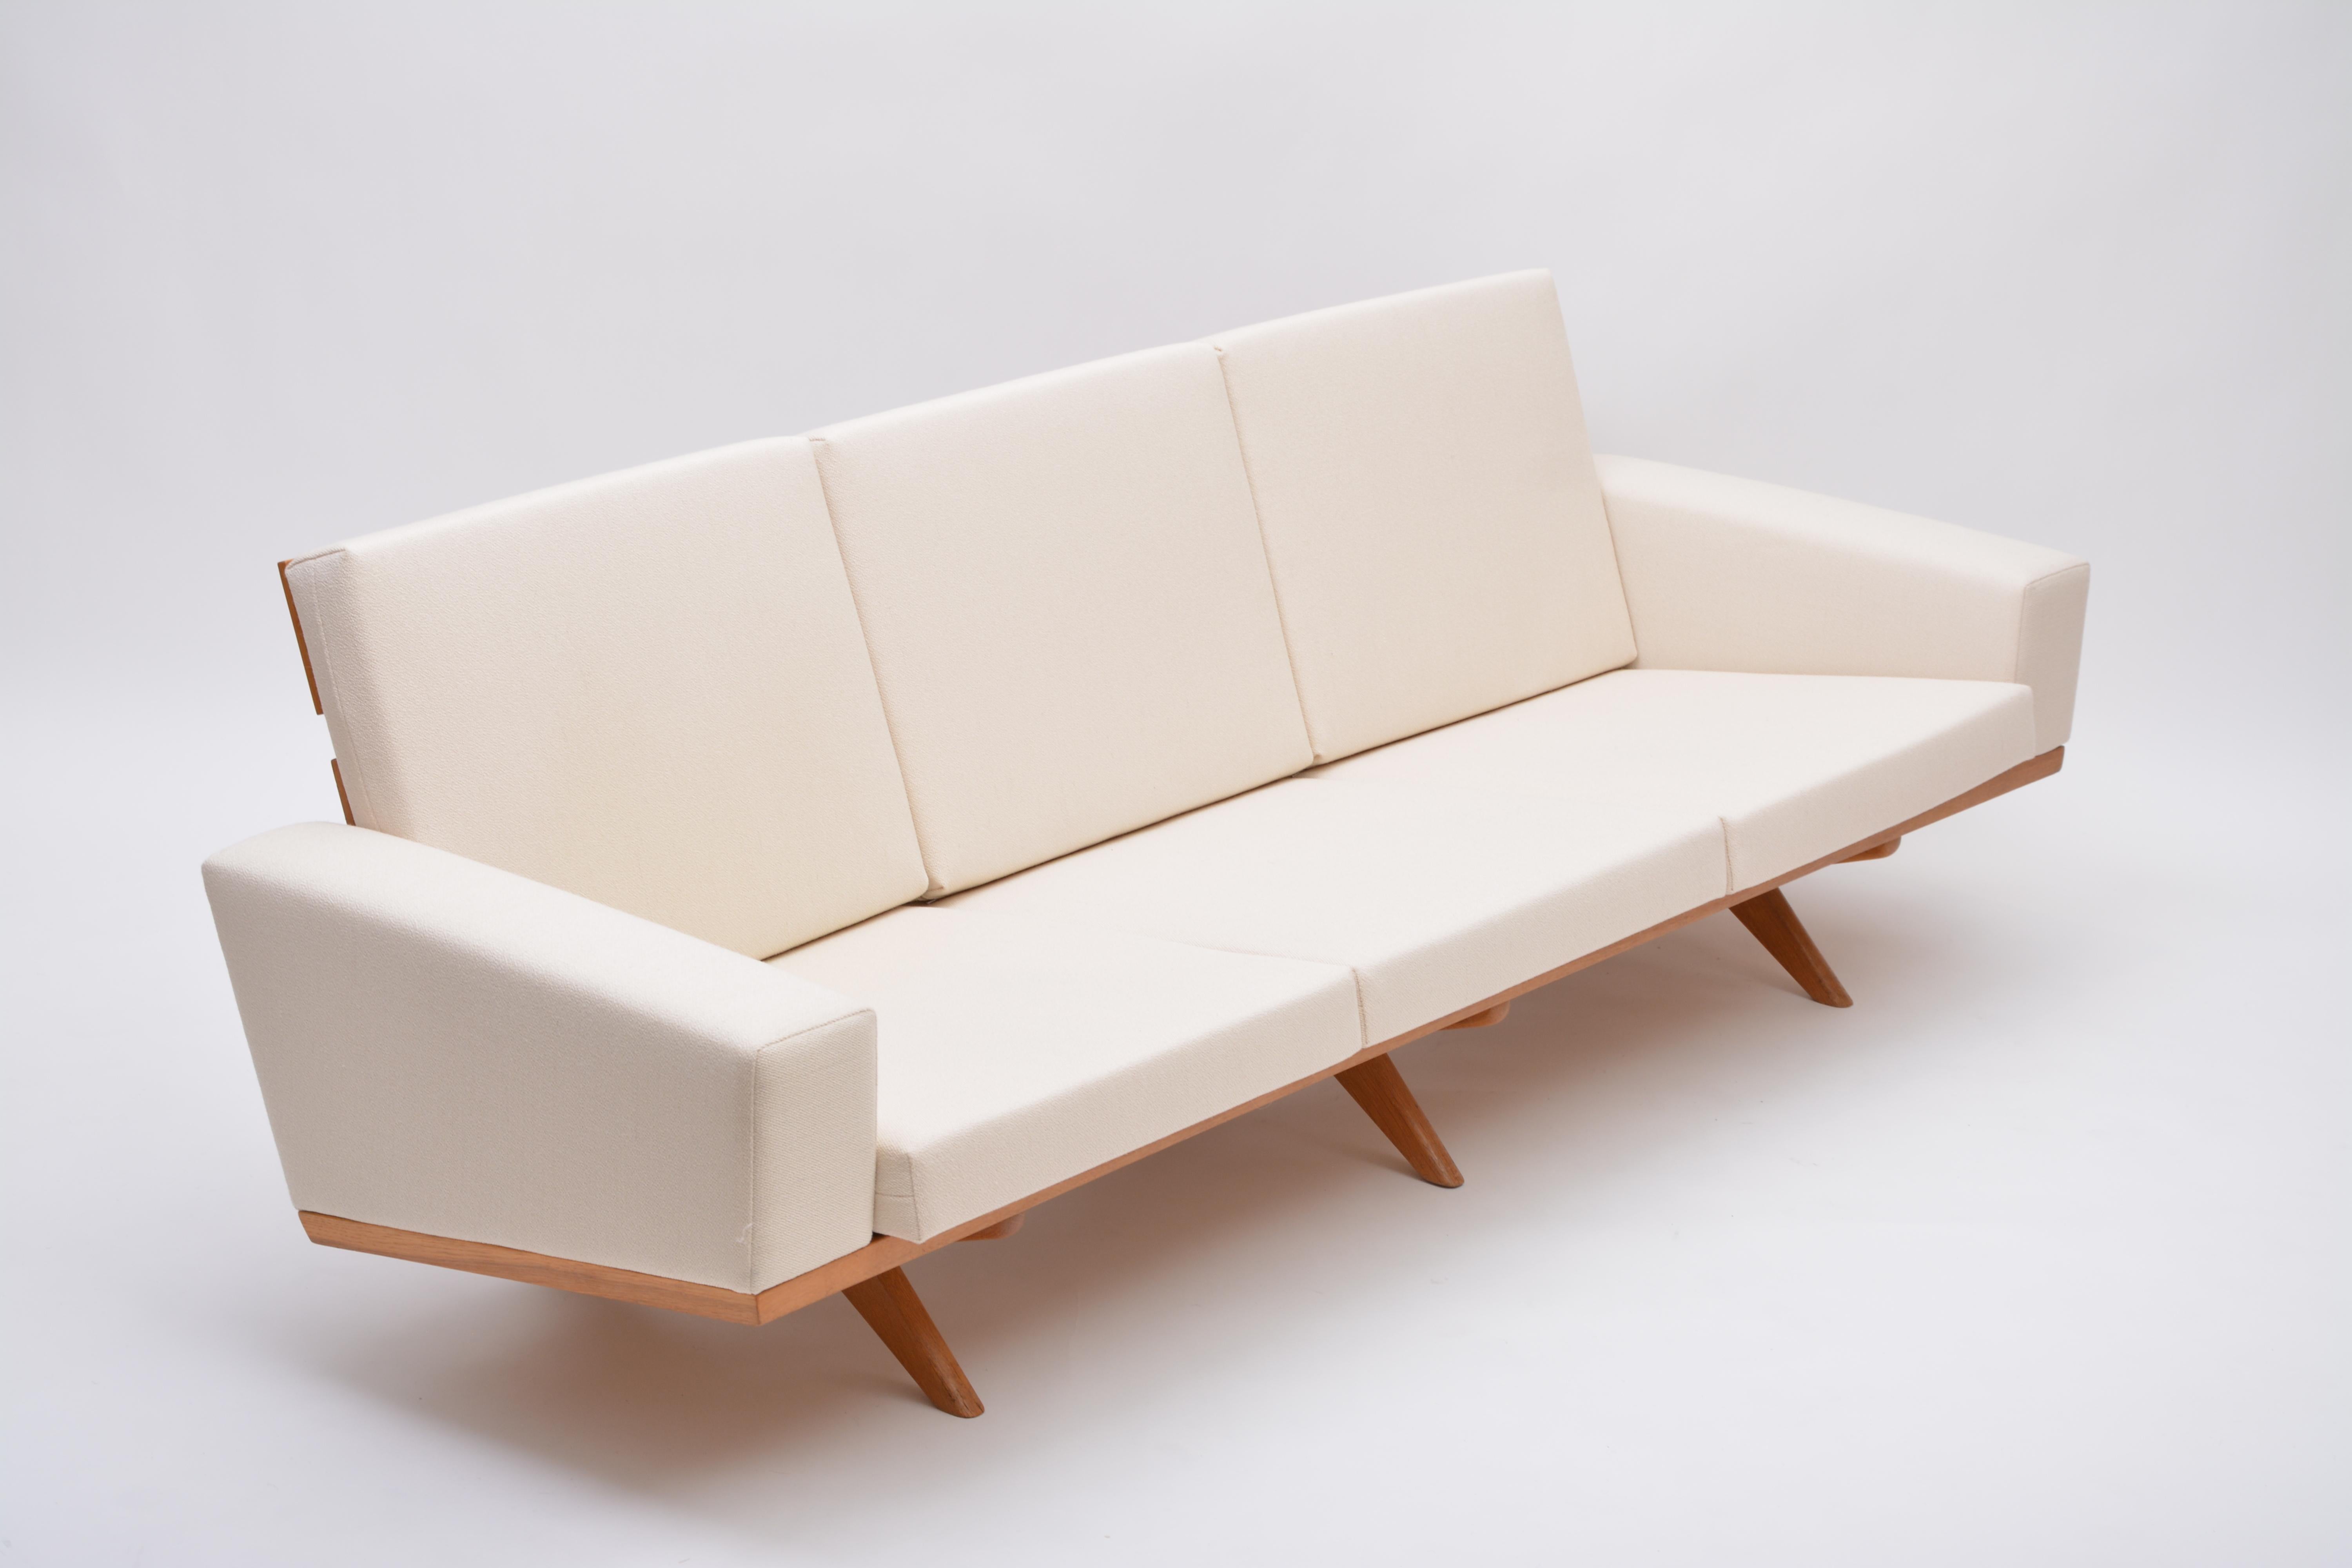 This sofa is the matching counterpart to the two chairs above and was also designed by Georg Thams in 1964 and produced by AS Vejen Møbelfabrik in Denmark.
The sofa is also made of oak, back cushions and seat cushions are loose. The sofa has been